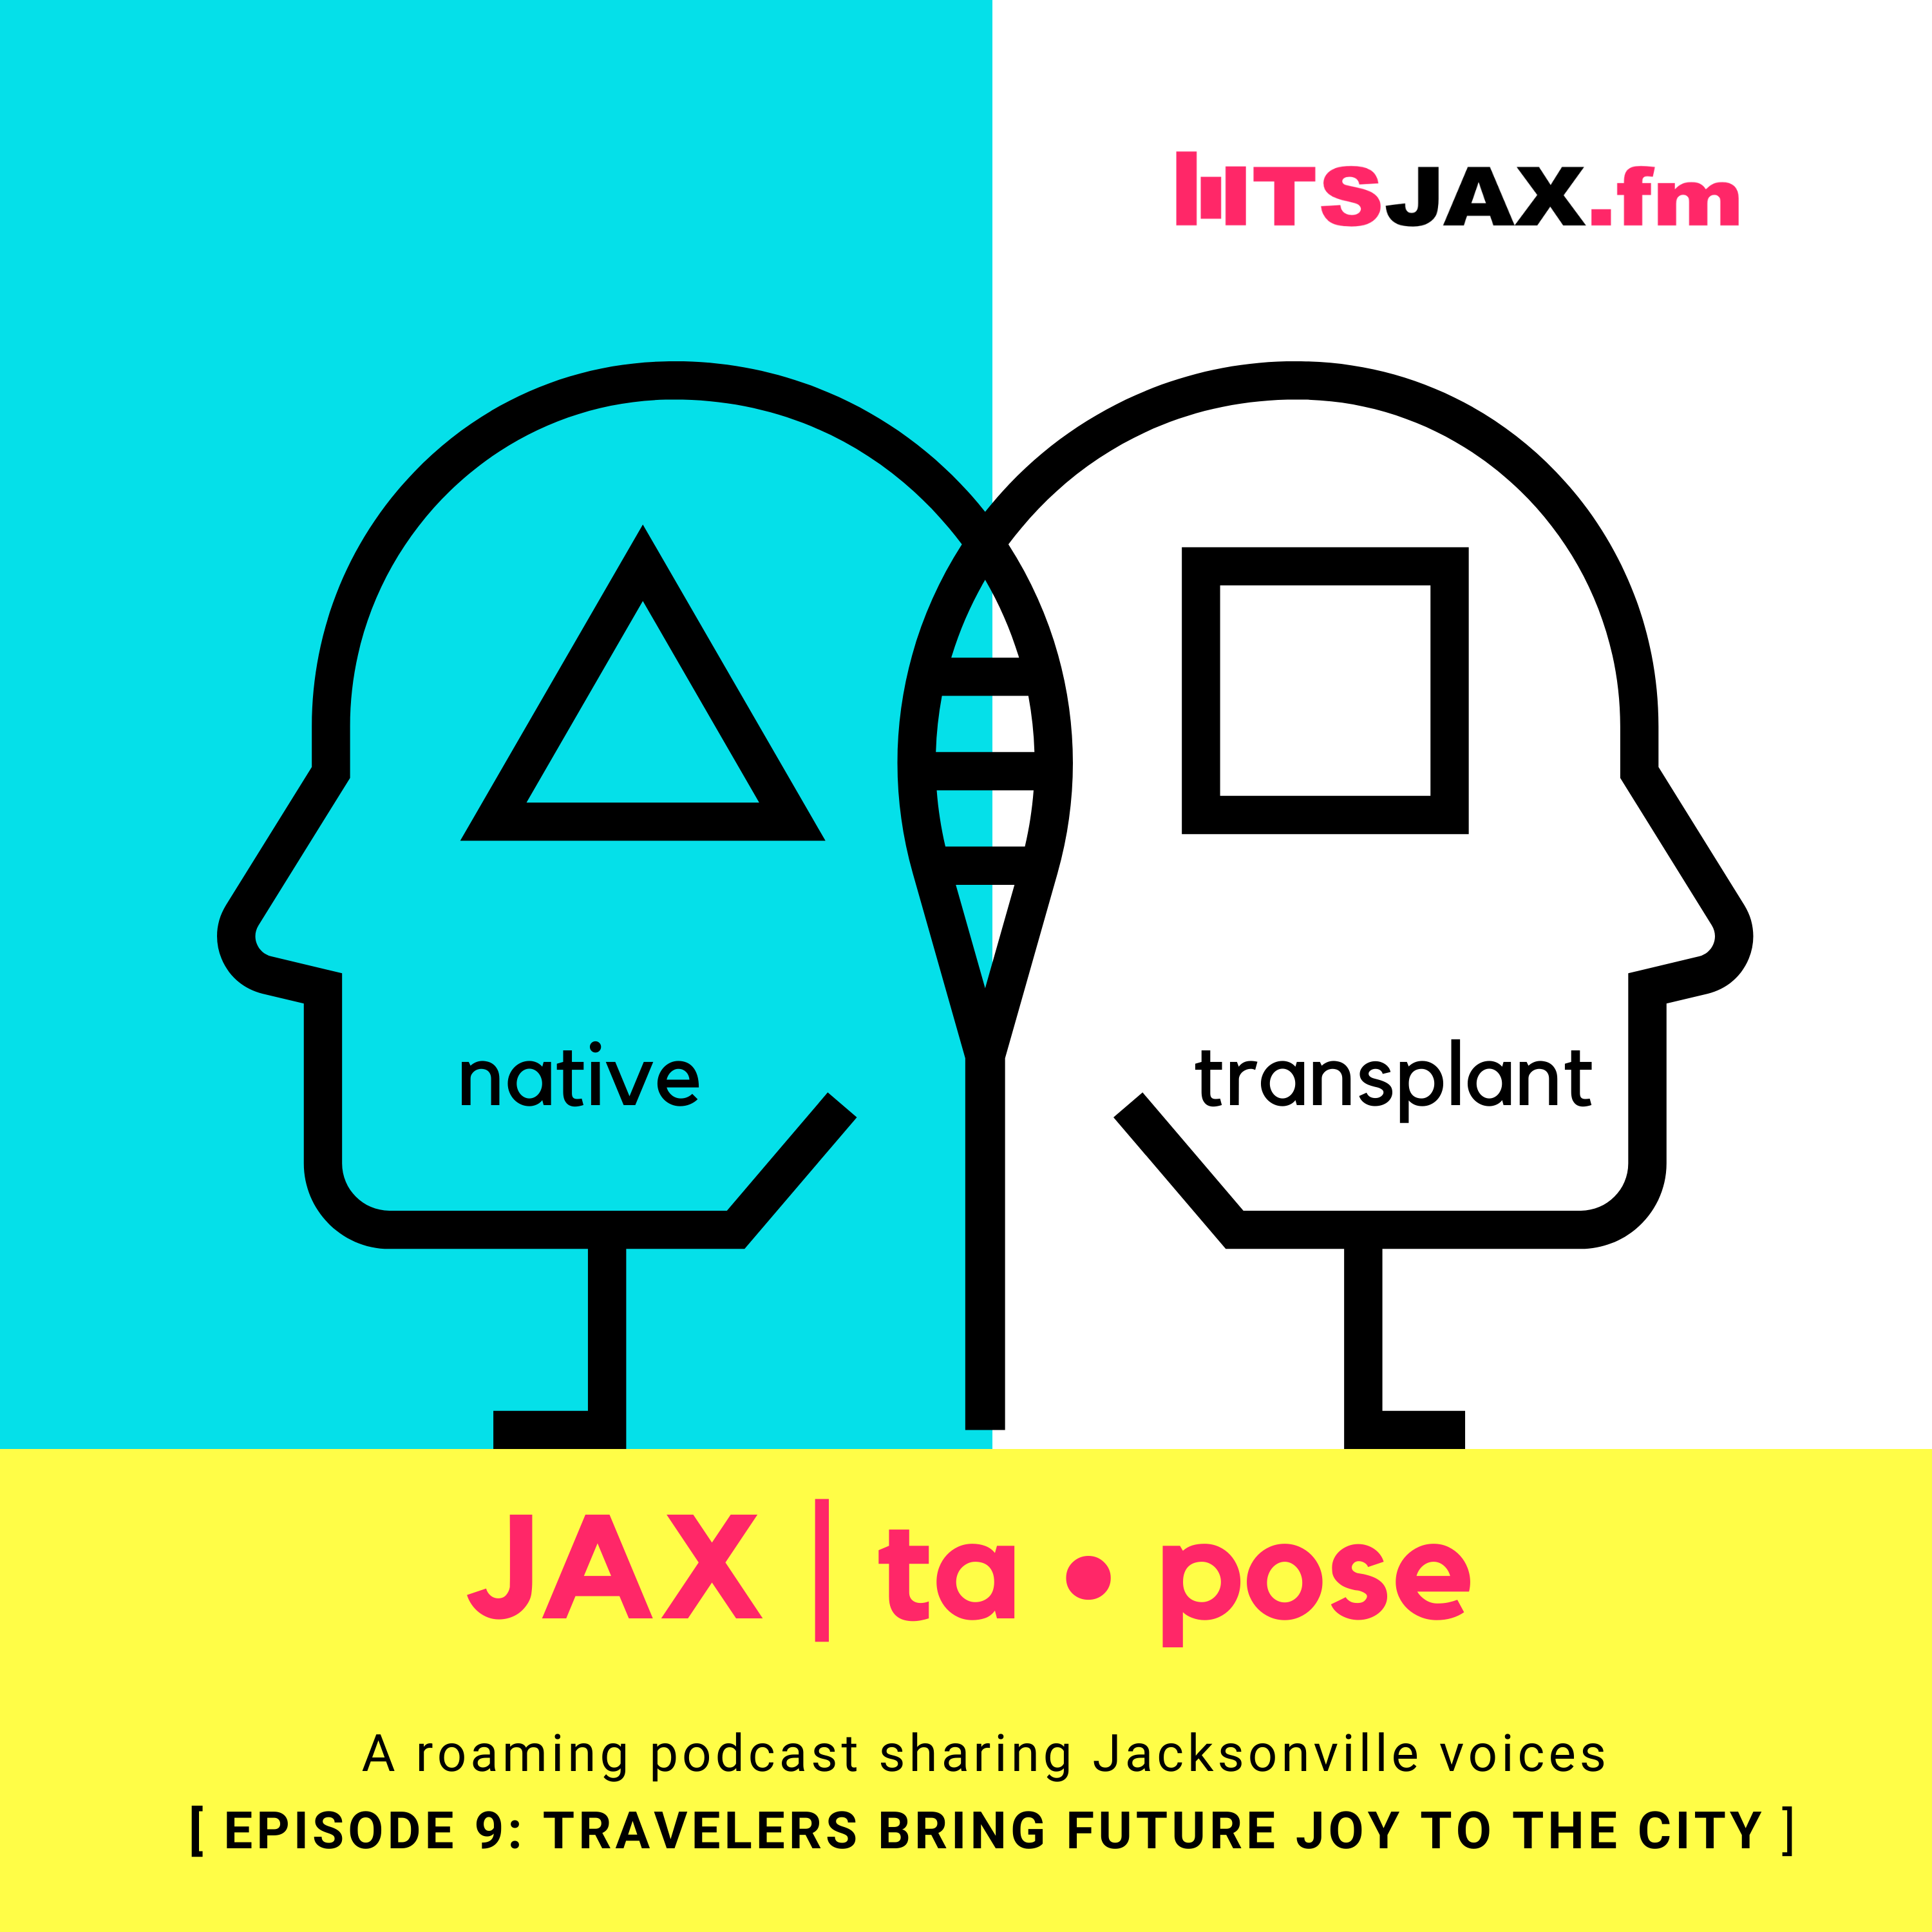 Episode 9: Travelers Bring Future Joy to the City